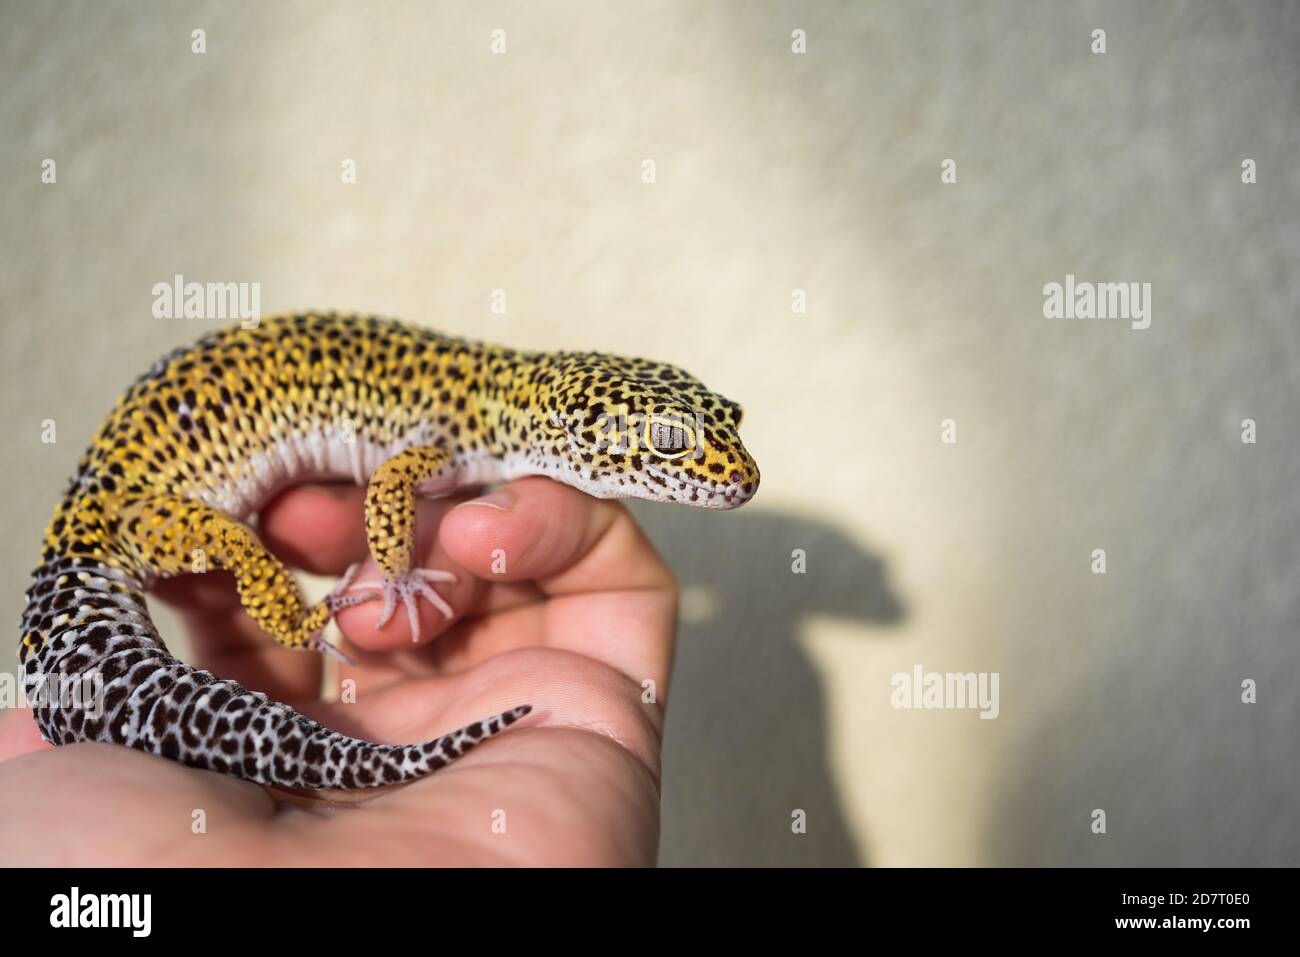 Eublepharis is cute leopard gecko sits on the hand. Stock Photo